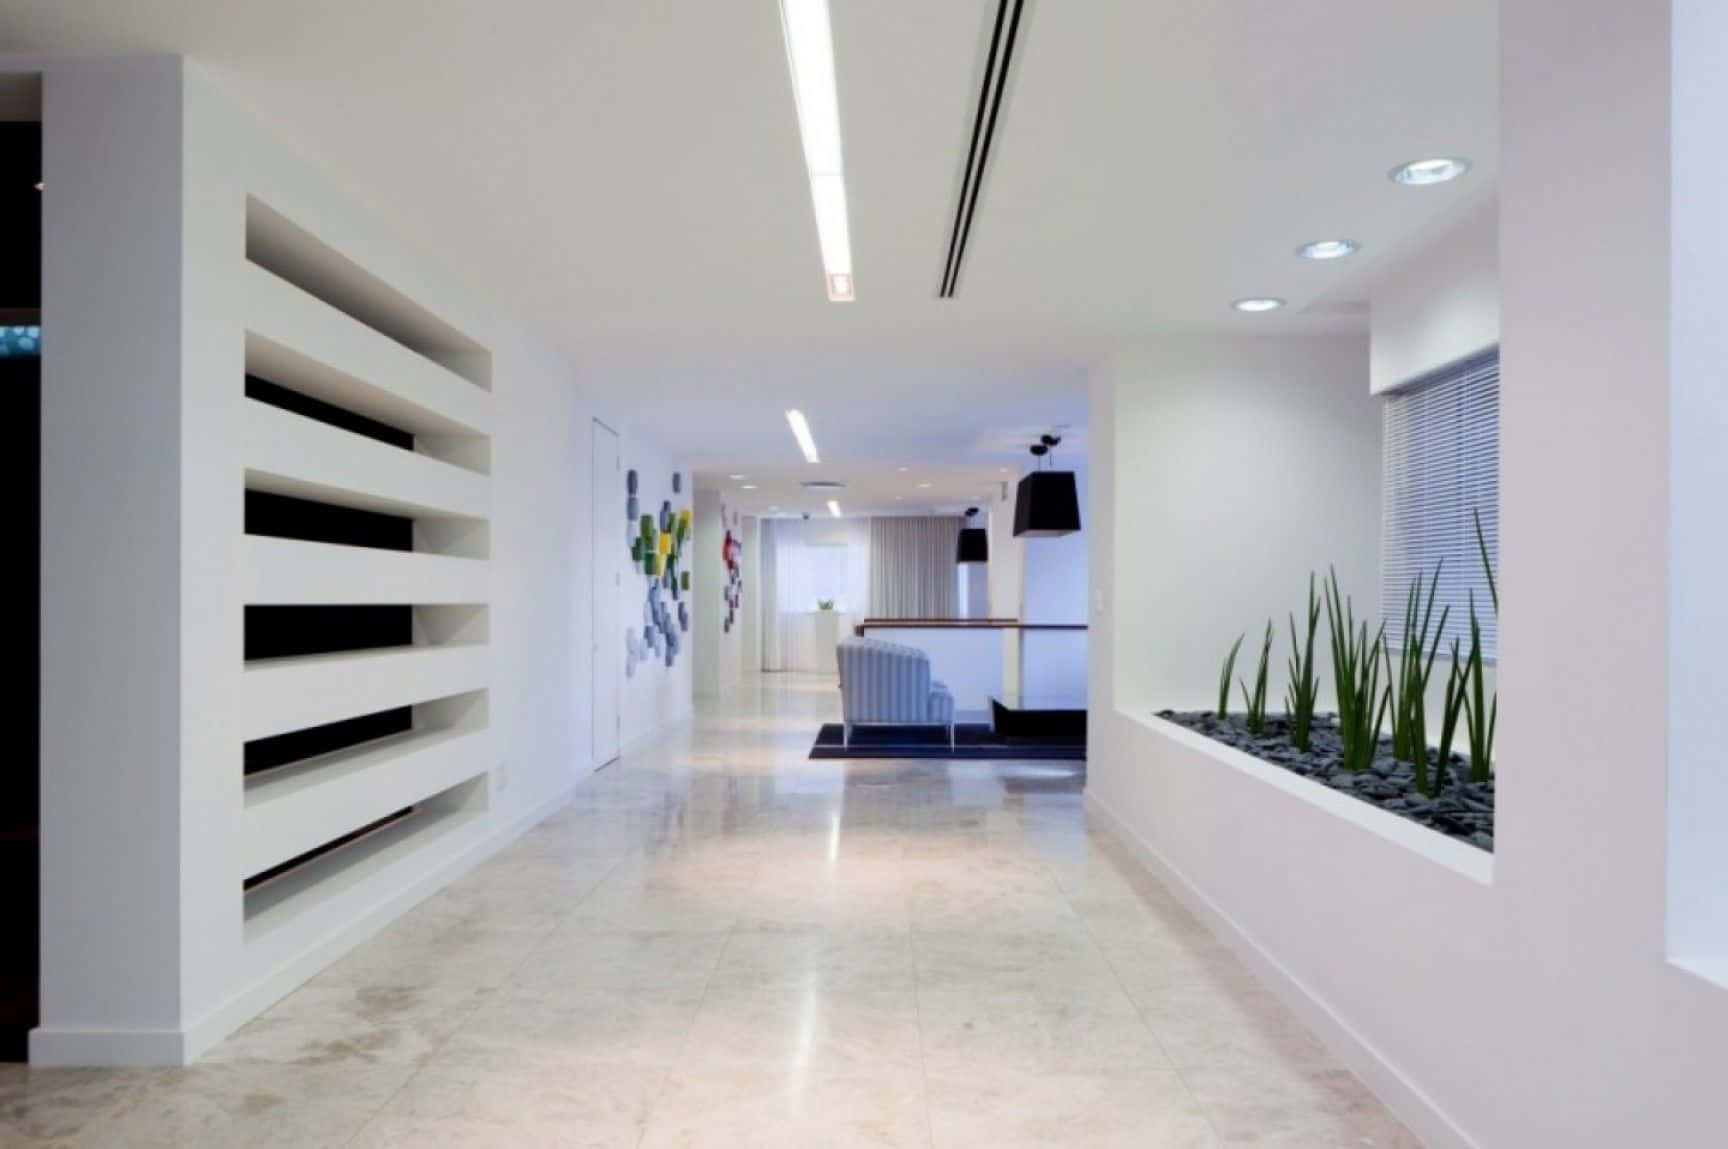 A Hallway With White Walls And Plants